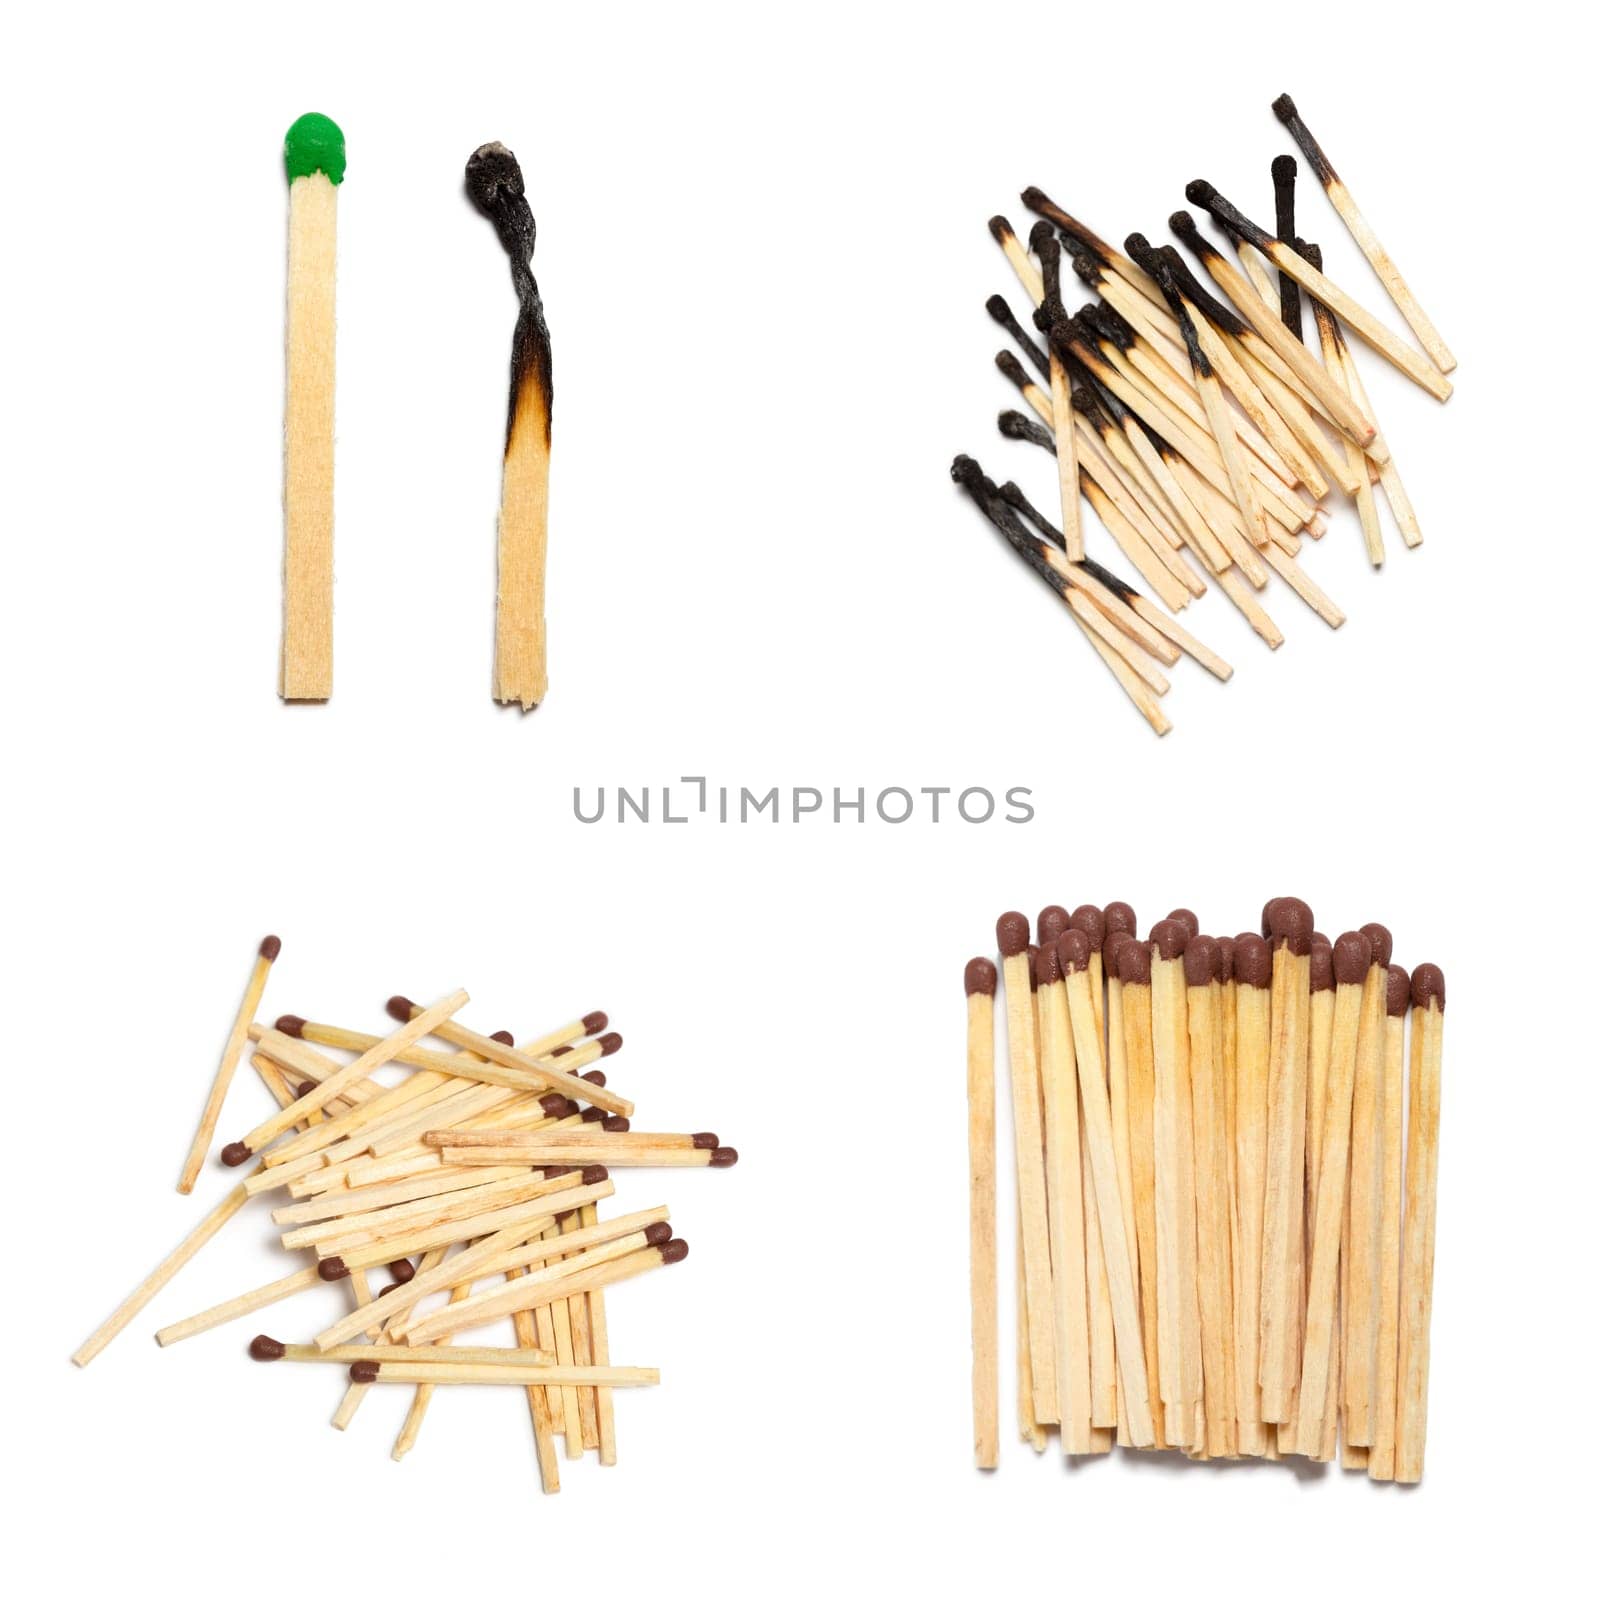 matches isolated on white background by Fabrikasimf